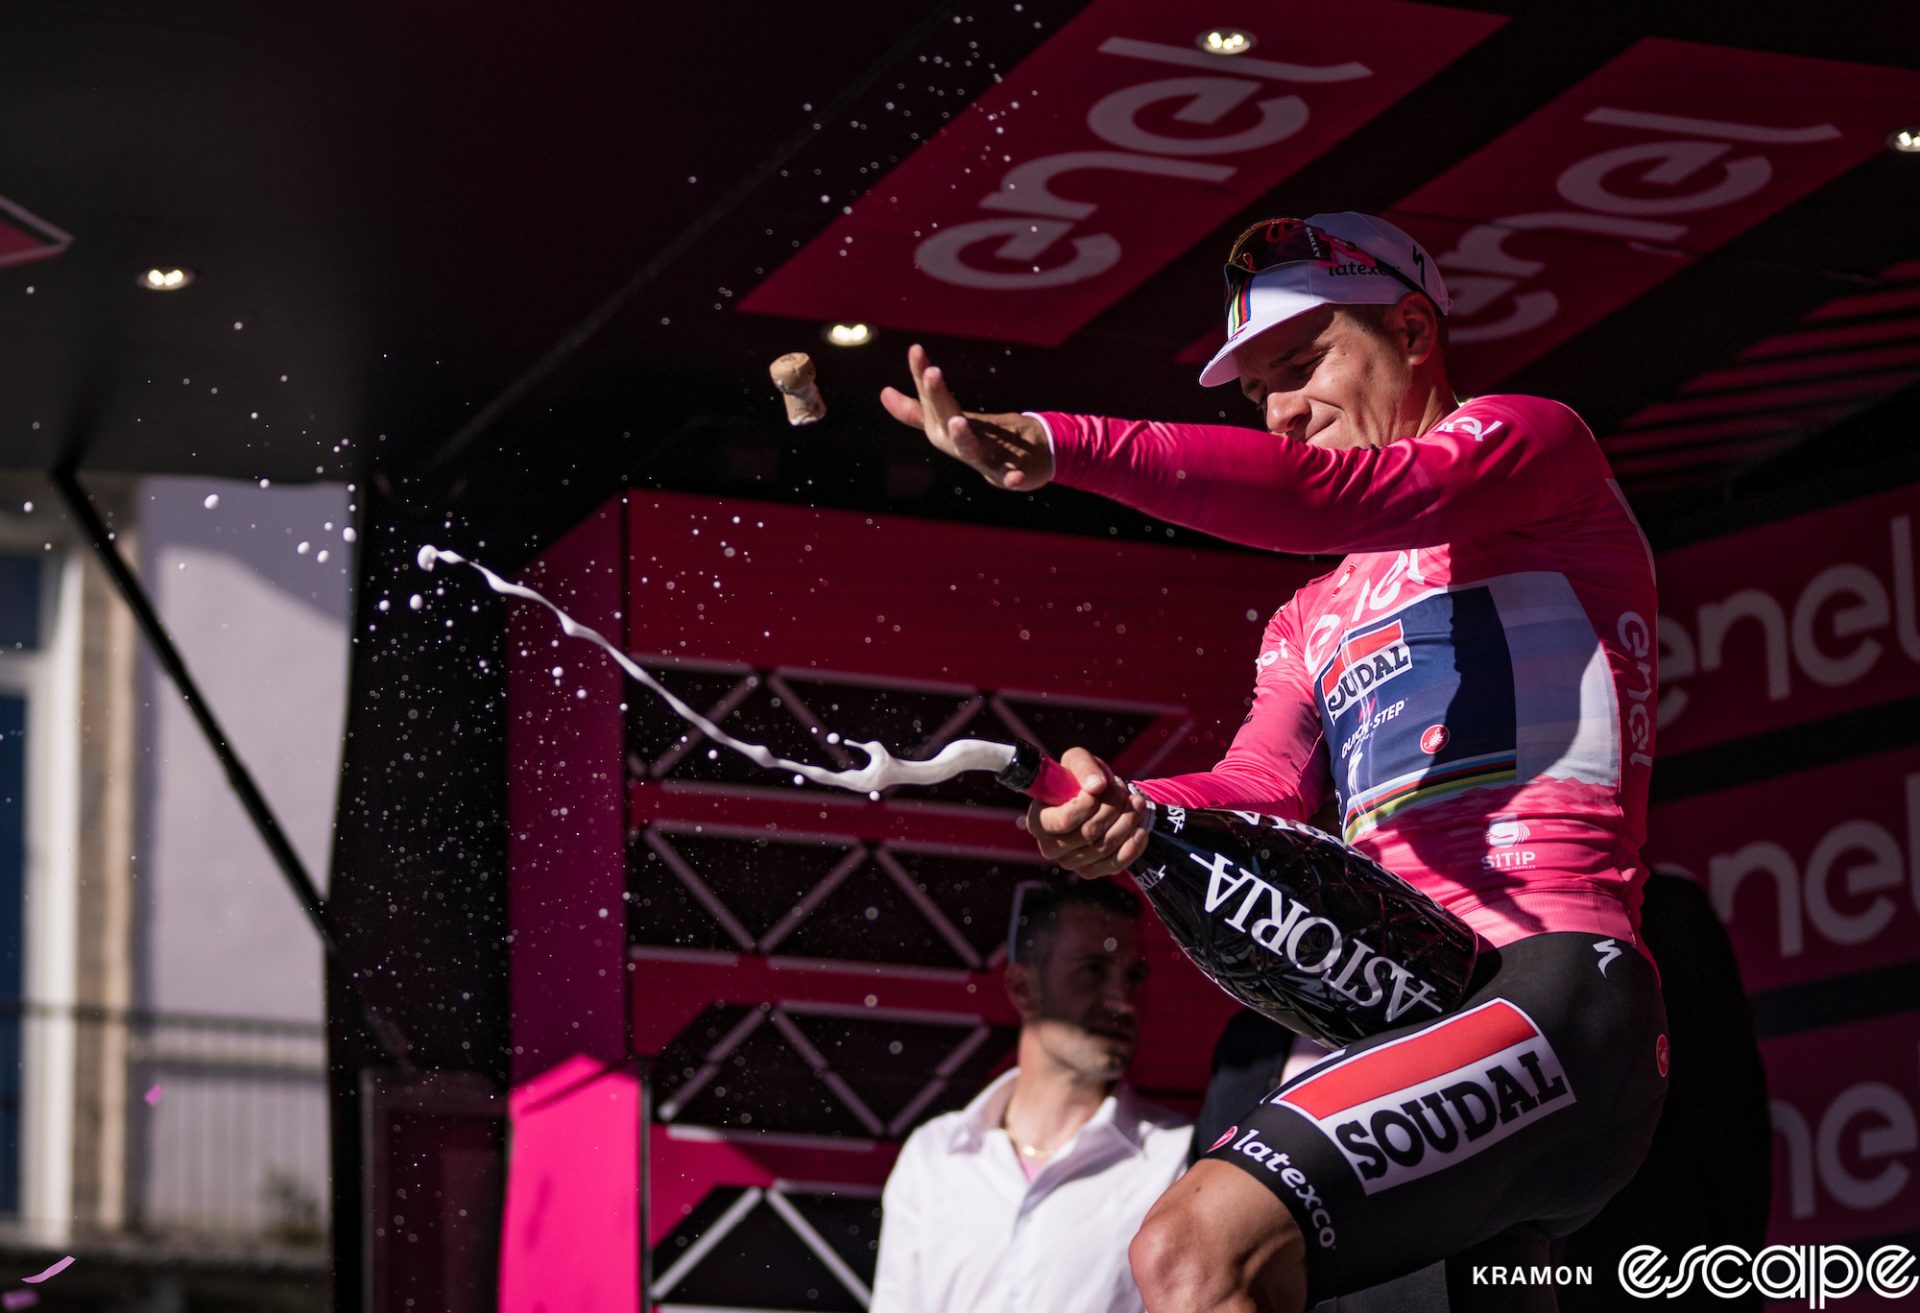 Remco Evenepoel cracks a giant bottle of champagne on the podium of stage 1 of the 2023 Giro d'Italia. He's in the pink jersey of race leader, and the cork is flying through the air in front of his hand as champagne starts to bubble and flow out of the bottle.